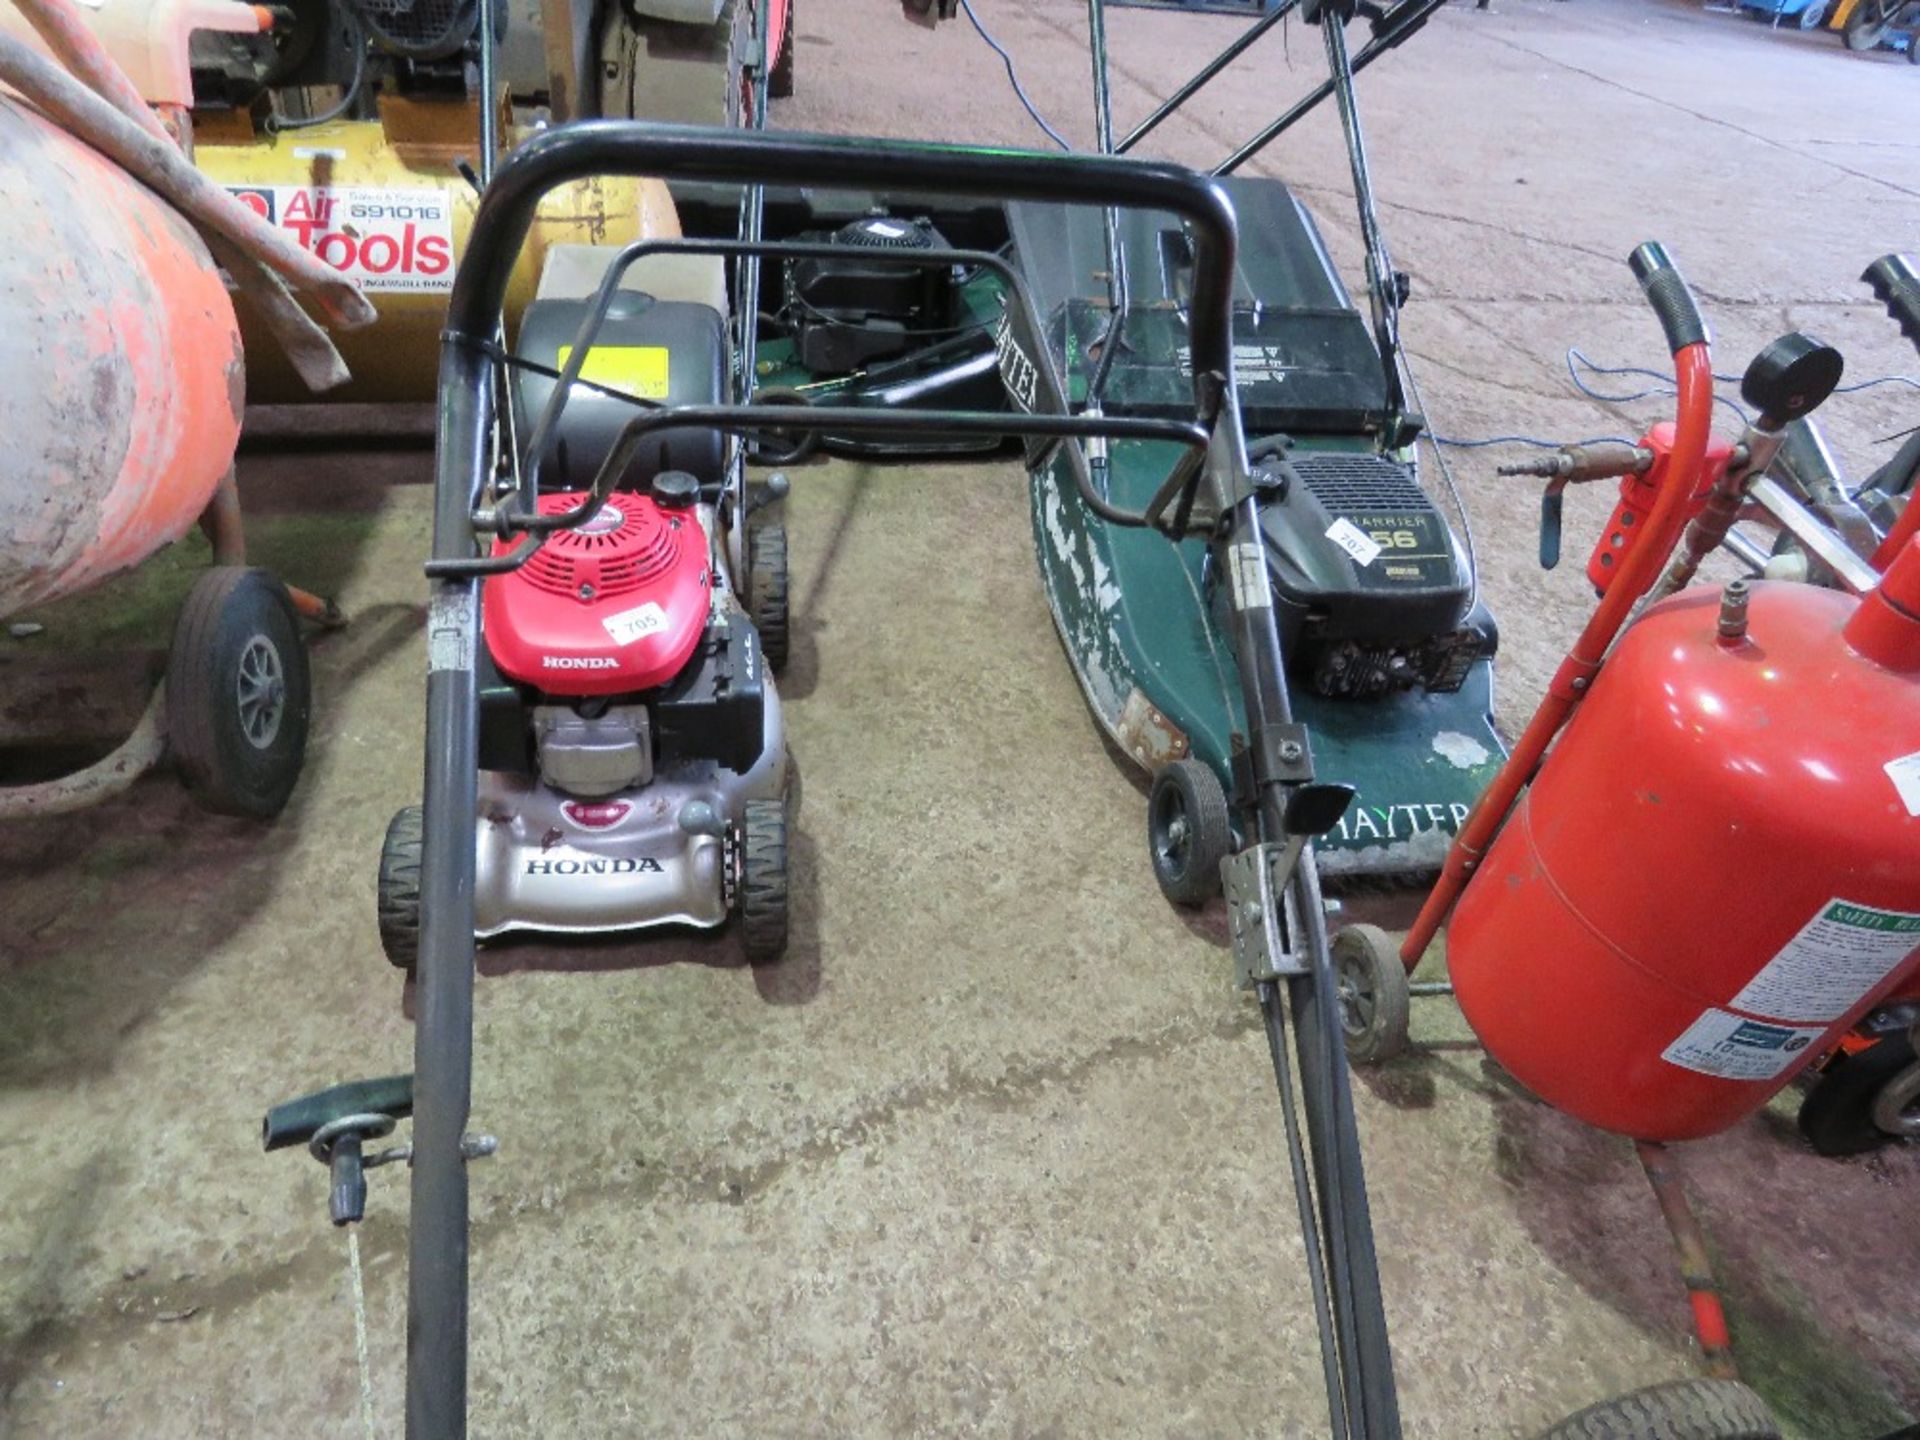 LASER SELF DRIVE PETROL ENGINED LAWNMOWER. NO COLLECTOR. THIS LOT IS SOLD UNDER THE AUCTIONEERS - Bild 3 aus 3